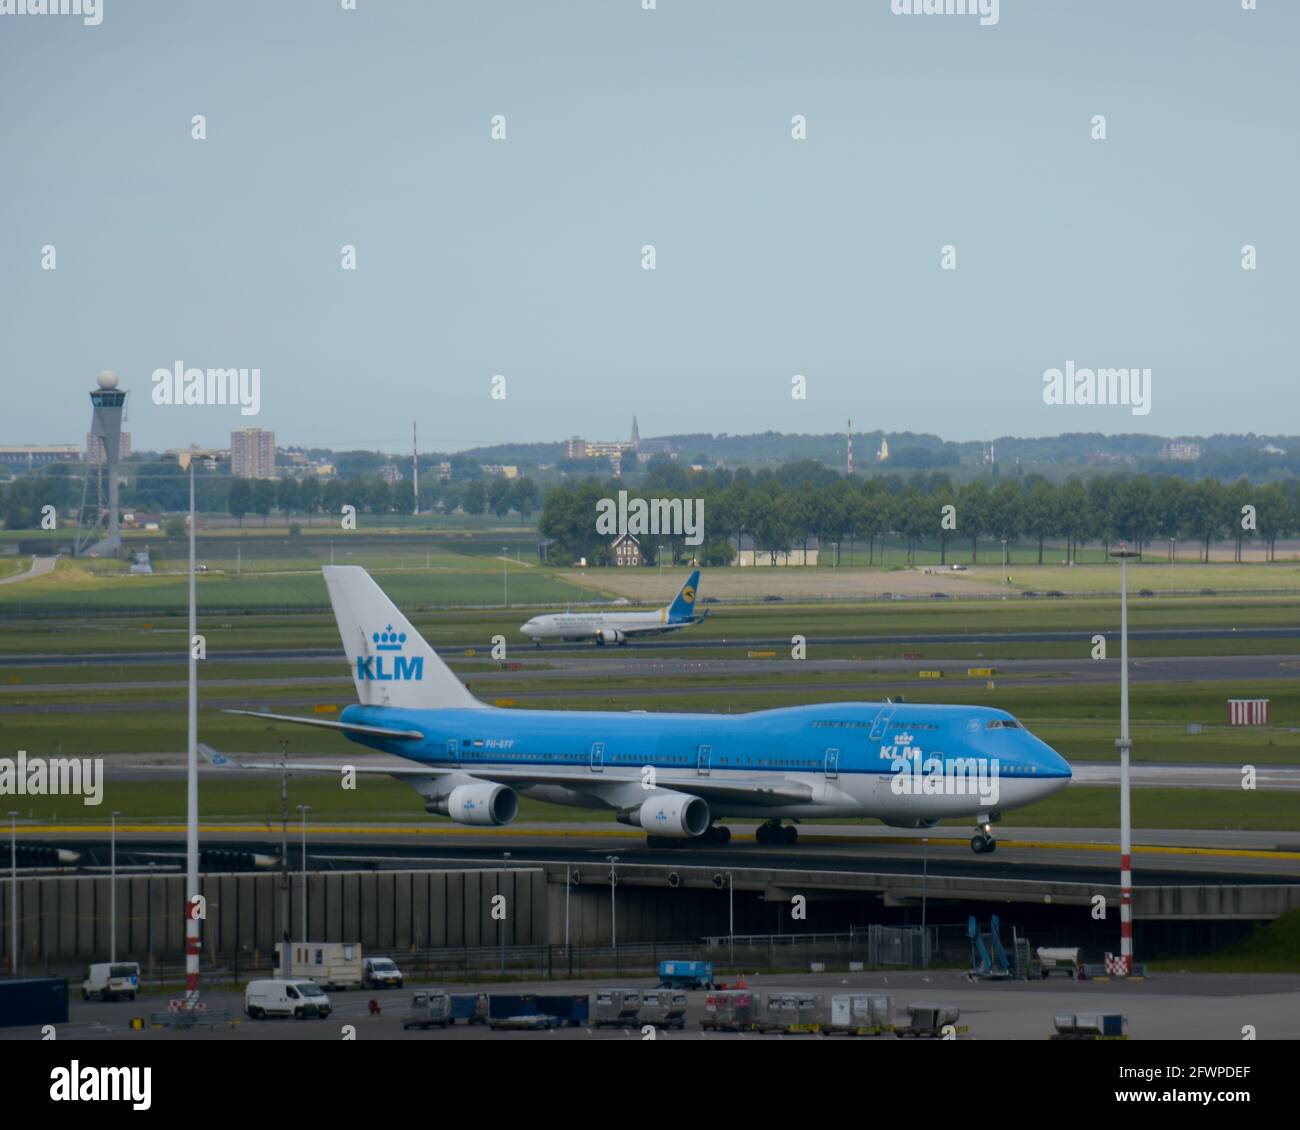 Amsterdam, Netherlands - 24th May, 2017: An old Boeing 747 KLM Royal Dutch Airlines on taxiway at the Amsterdam Airport Schiphol in the city of Amster Stock Photo